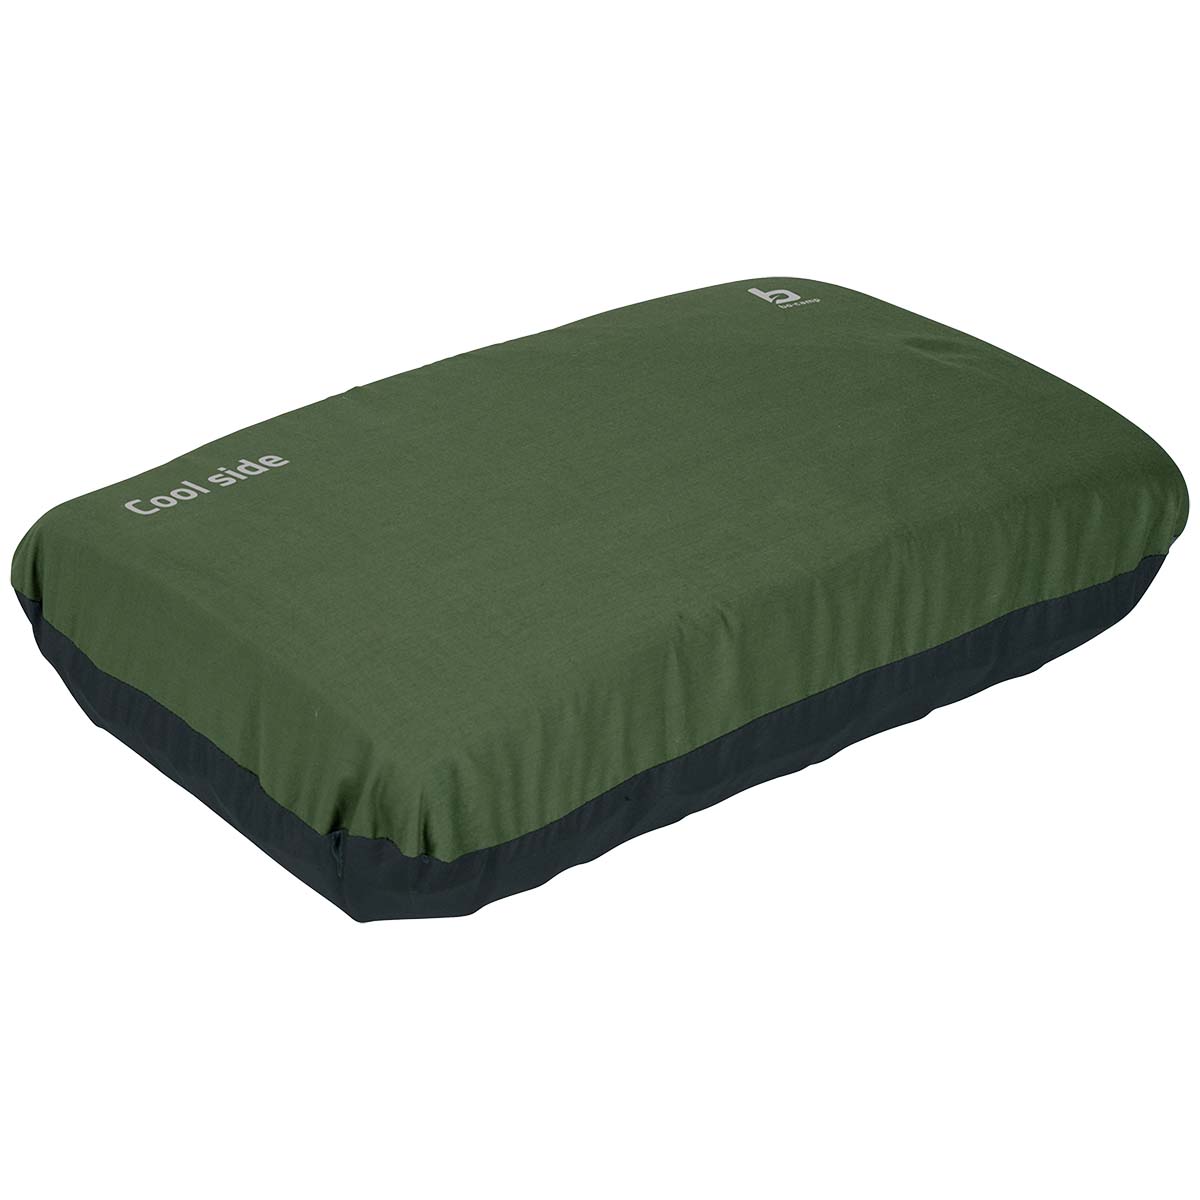 3506640 "A comfortable pillow. Adjusts to the ergonomics of the user. A 'cool side' with polyester cotton and a 'warm side' with soft polyester. Both sides of the pillow can therefore be used. Different comfort on top and bottom. The hardness and height of the air cushion are adjustable with air."